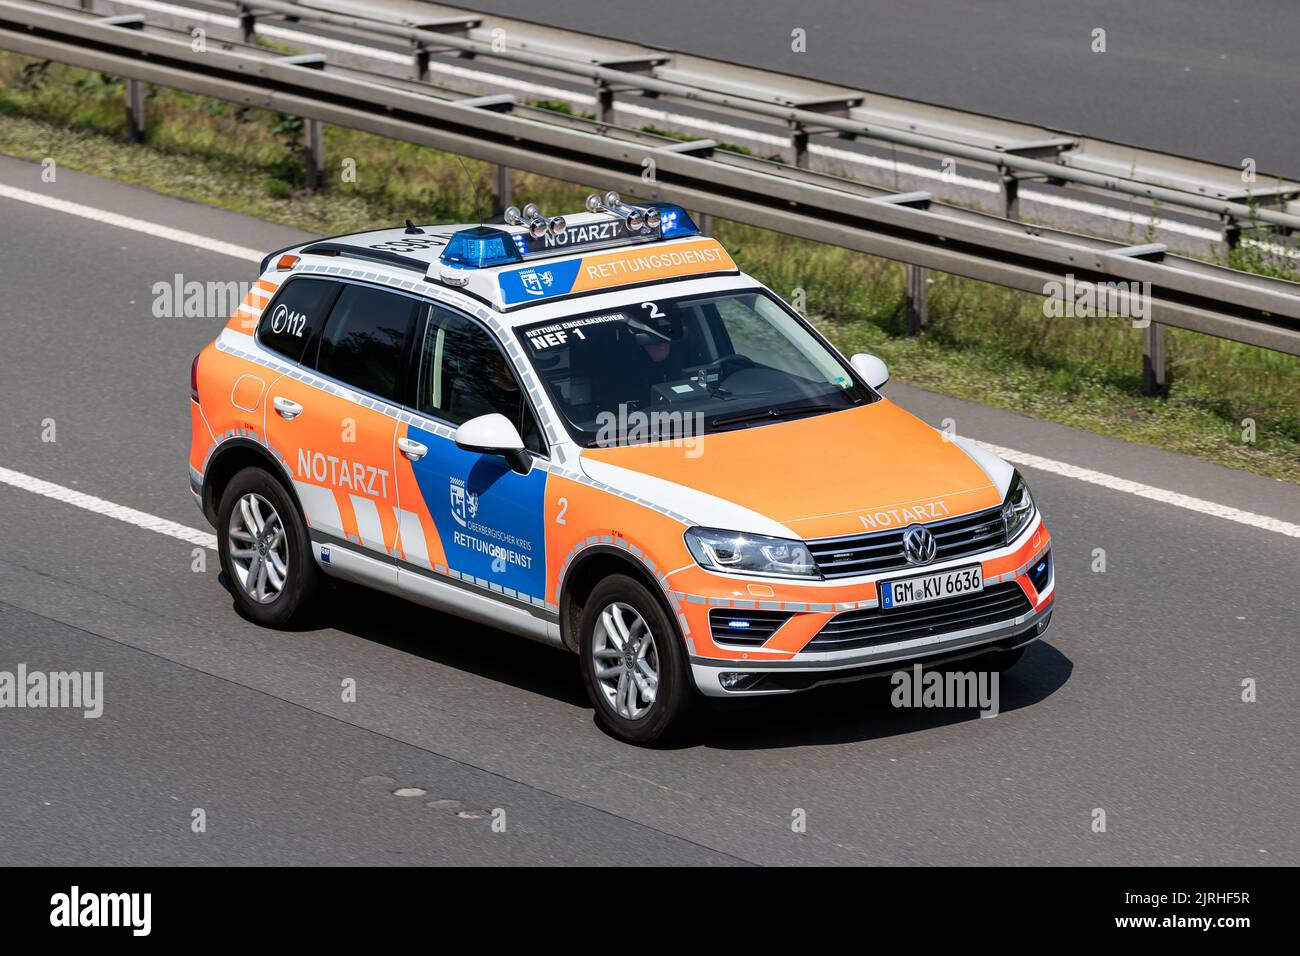 German emergency physician car of the Oberberg distict with active blue emergency lighting on motorway Stock Photo